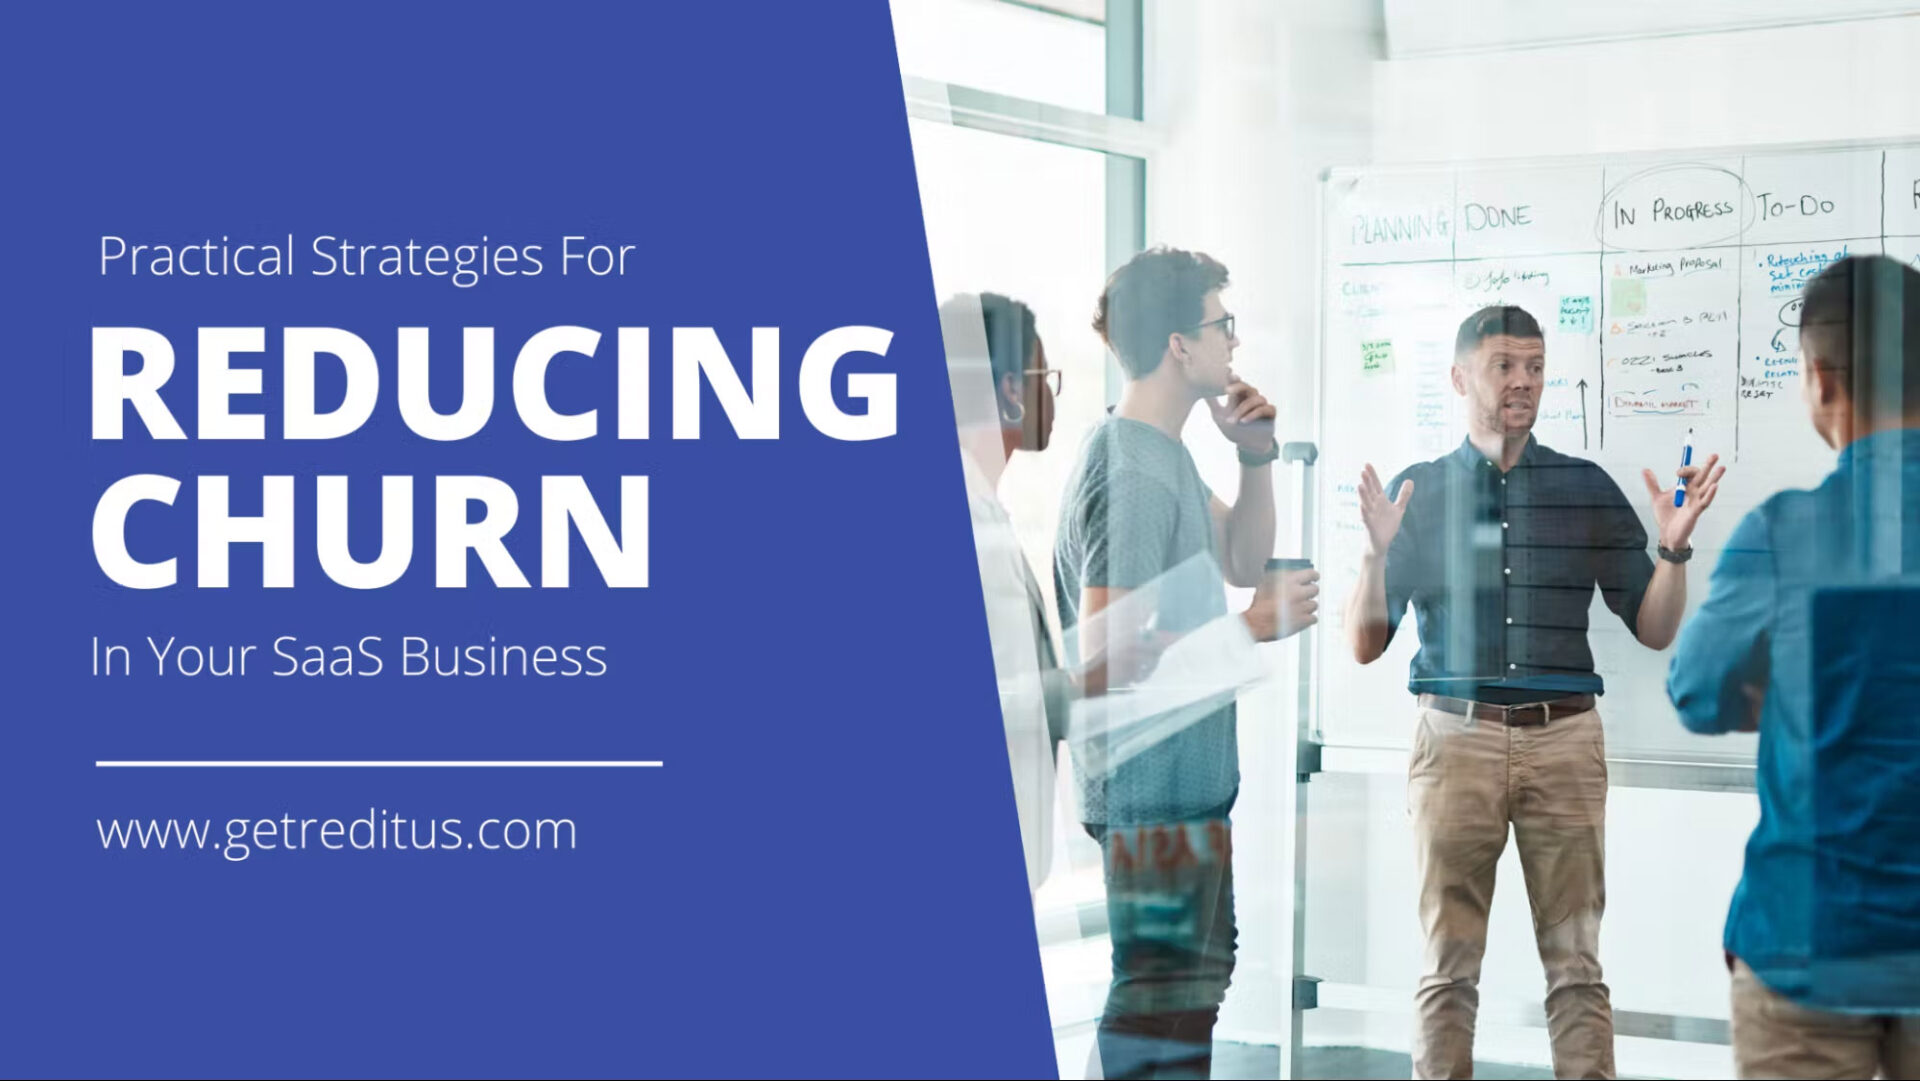 https://www.getreditus.com/blog/how-to-reduce-churn-for-your-saas-business-practical-strategies/